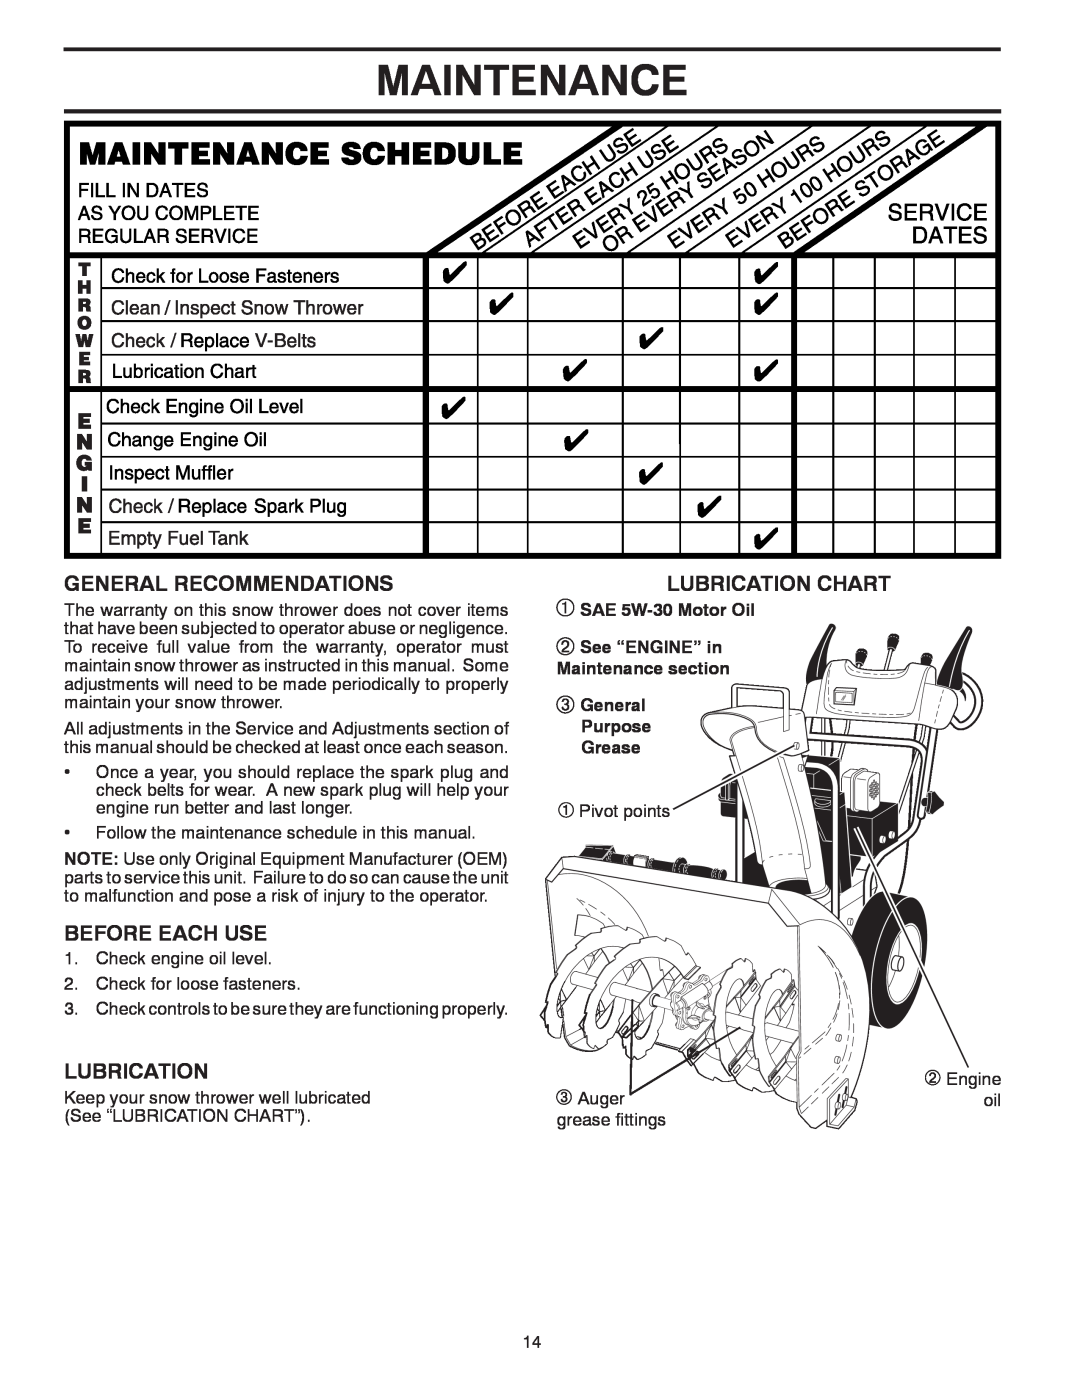 Poulan 96192003100, PR1030ES Maintenance, General Recommendations, Before Each Use, Lubrication Chart, Purpose Grease 